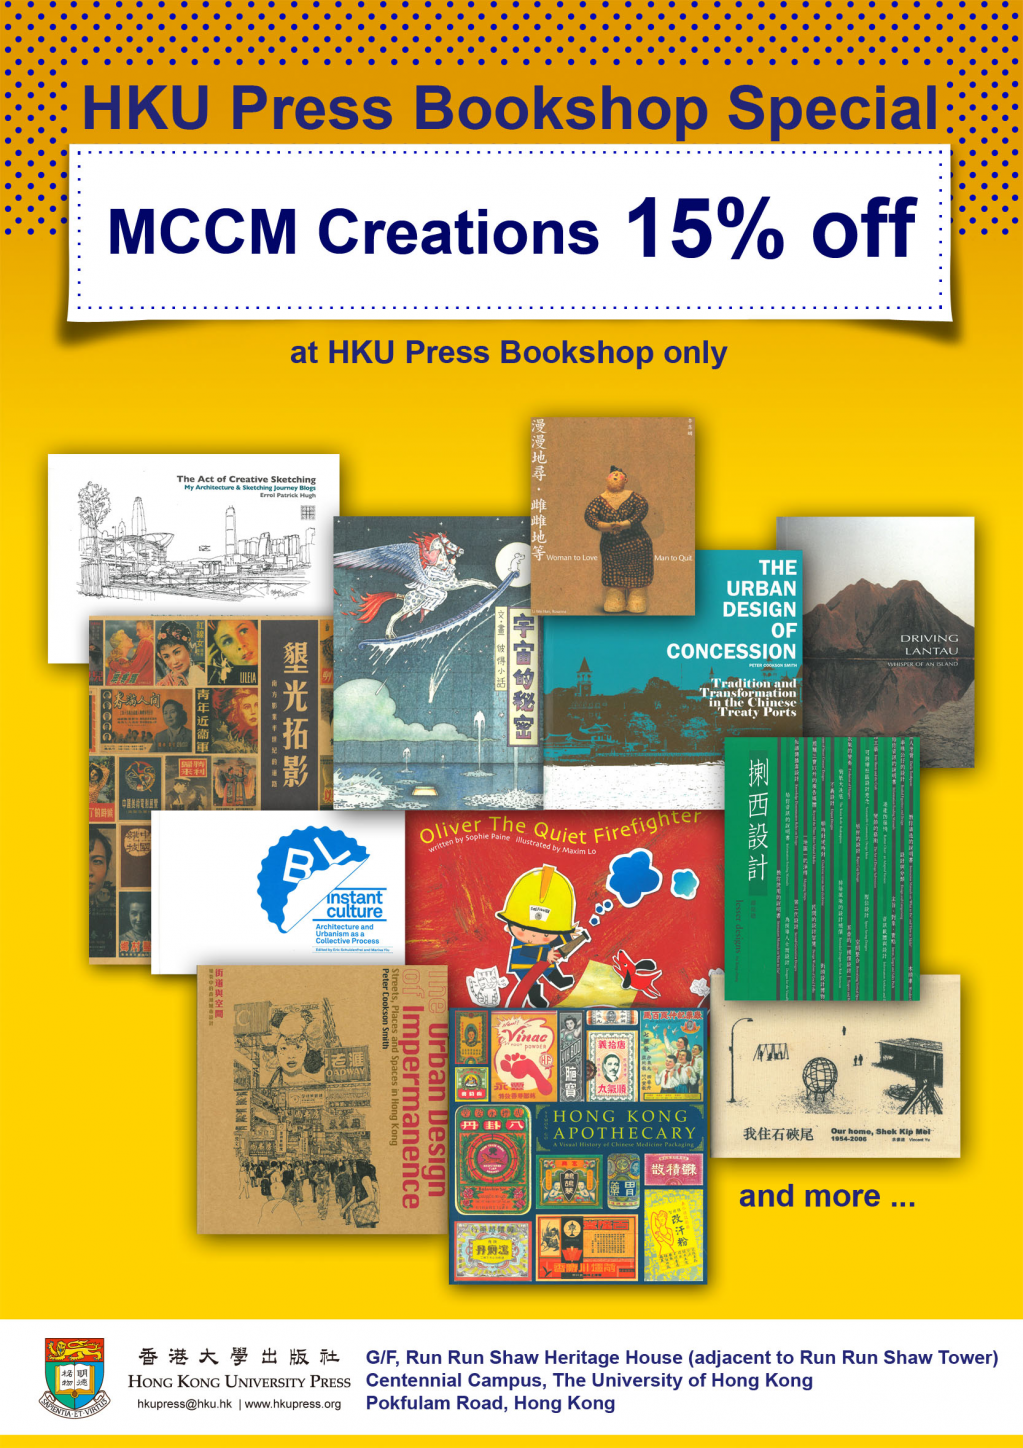 MCCM Creations 15% off at HKUP Bookshop only!